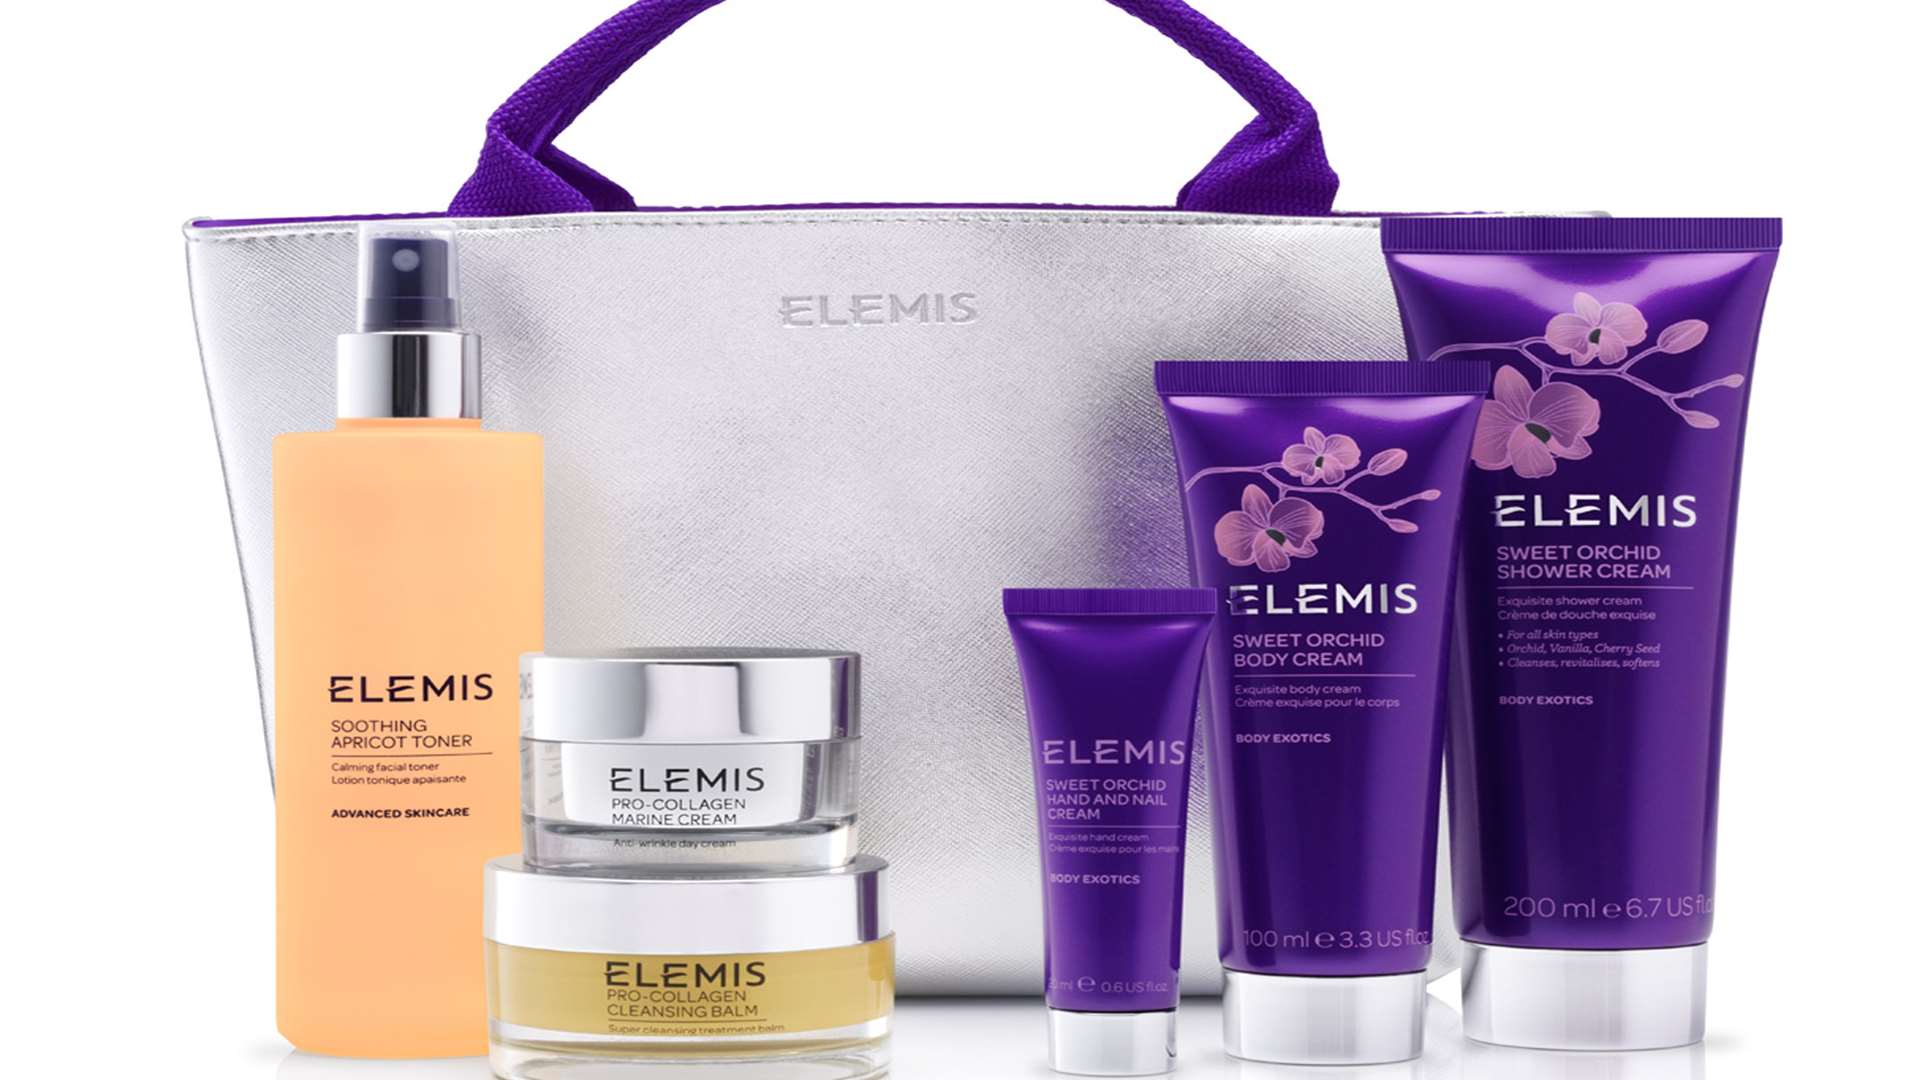 FOR HER: It's back and it's more beautiful than ever: Elemis and QVC have once again teamed up to offer a pair of Sensational Skin Collections, in Frangipani Monoi or new Sweet Orchid scents, at a massive discount - but for one day only. The six-piece sets (plus a silver tote bag), worth over £130, will be on sale for under £45 from midnight on November 15, so make sure you've got the date in your diary.